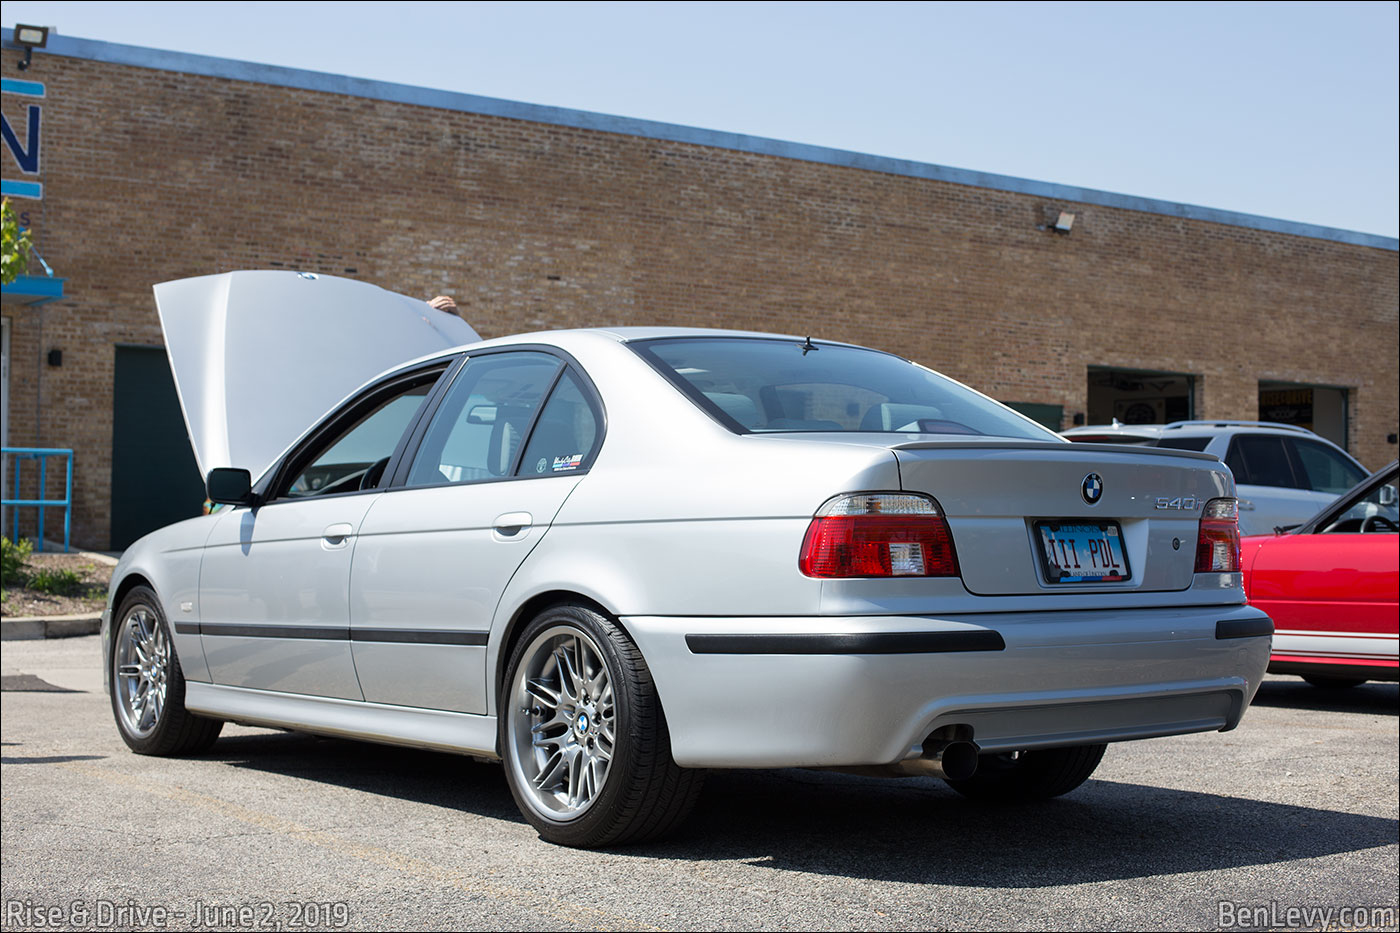 Silver E39 BMW 540i with M-Sport package